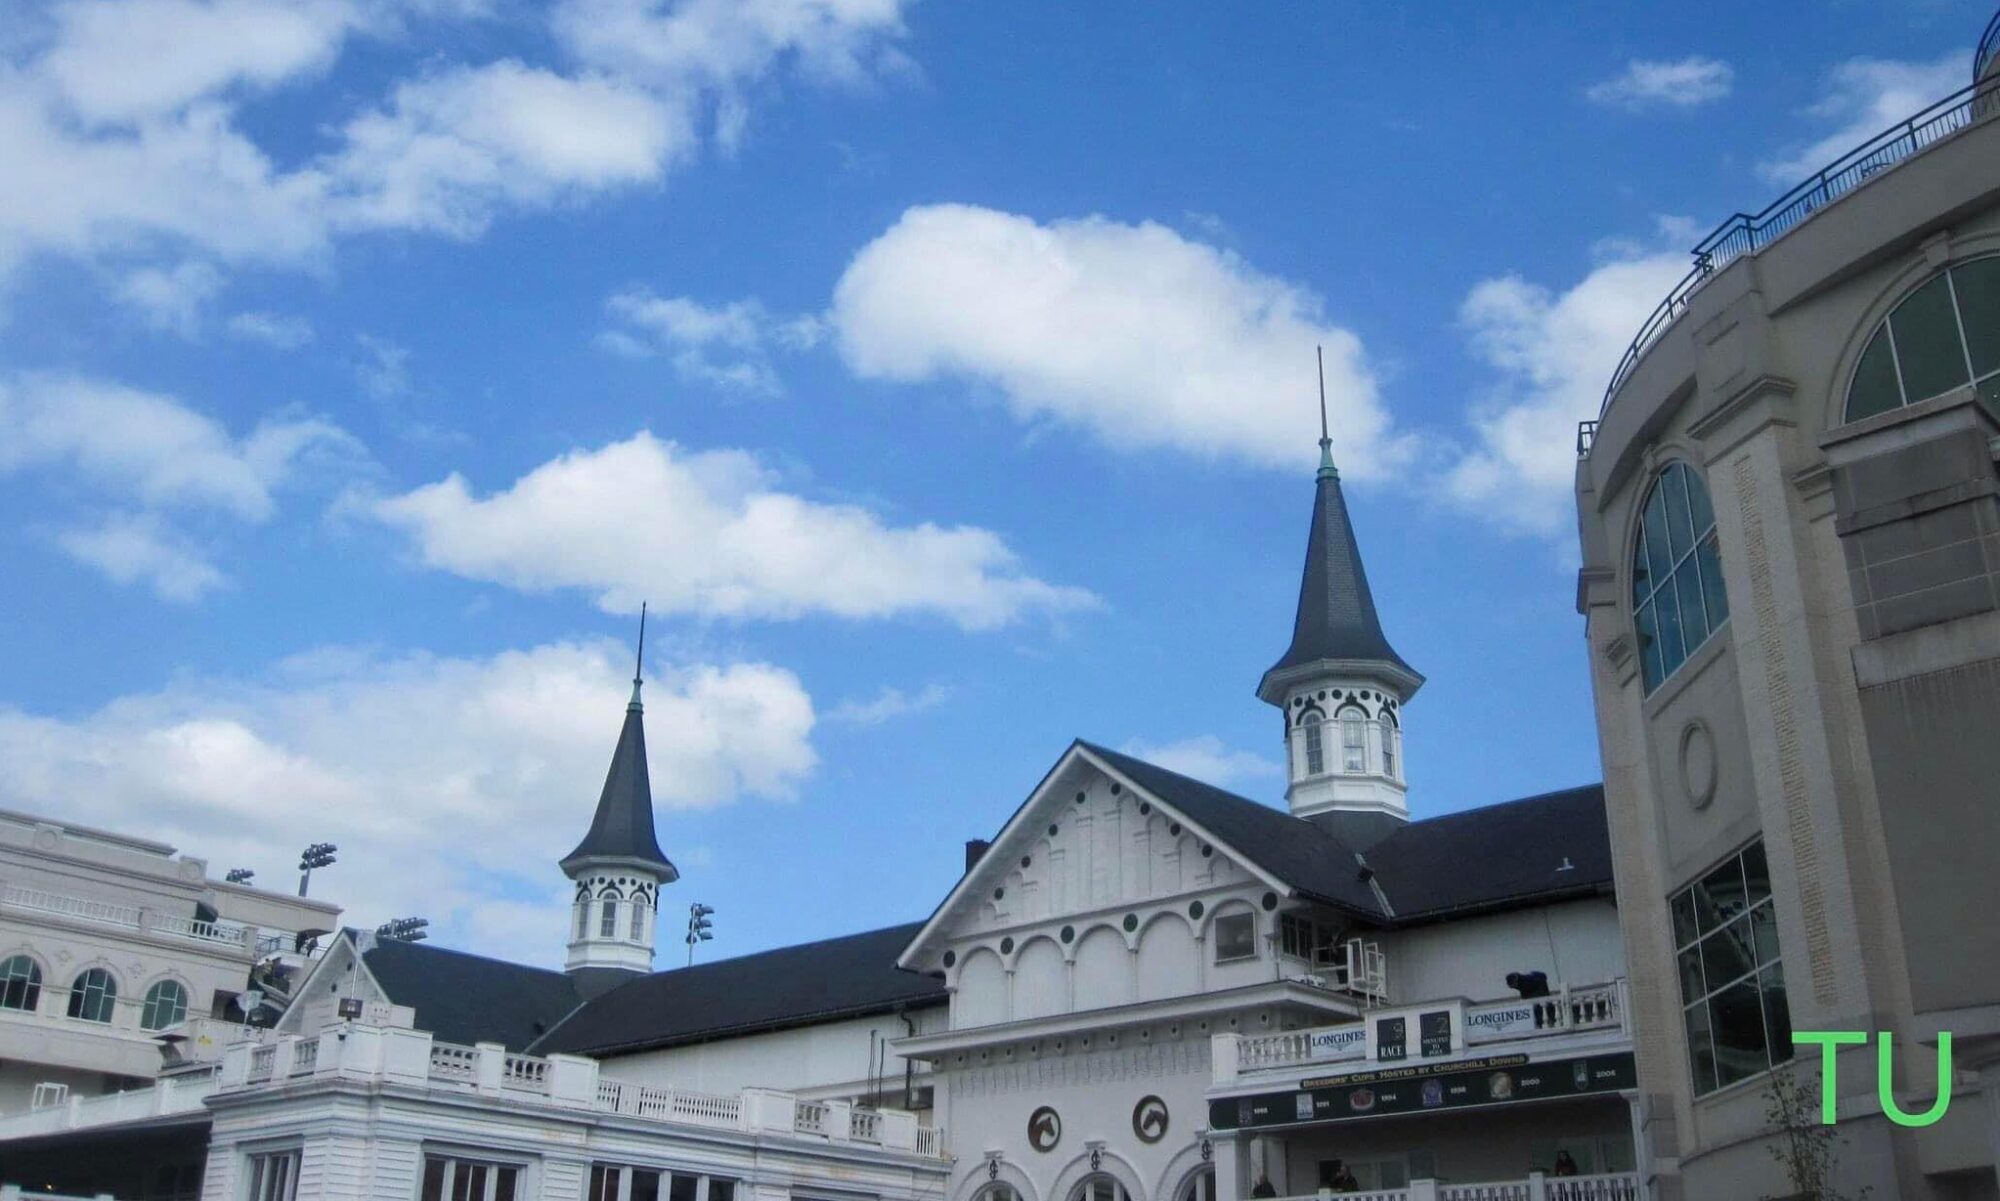 Thoroughbred U is ready for the 150th Kentucky Oaks and Kentucky Derby at Churchill Downs!